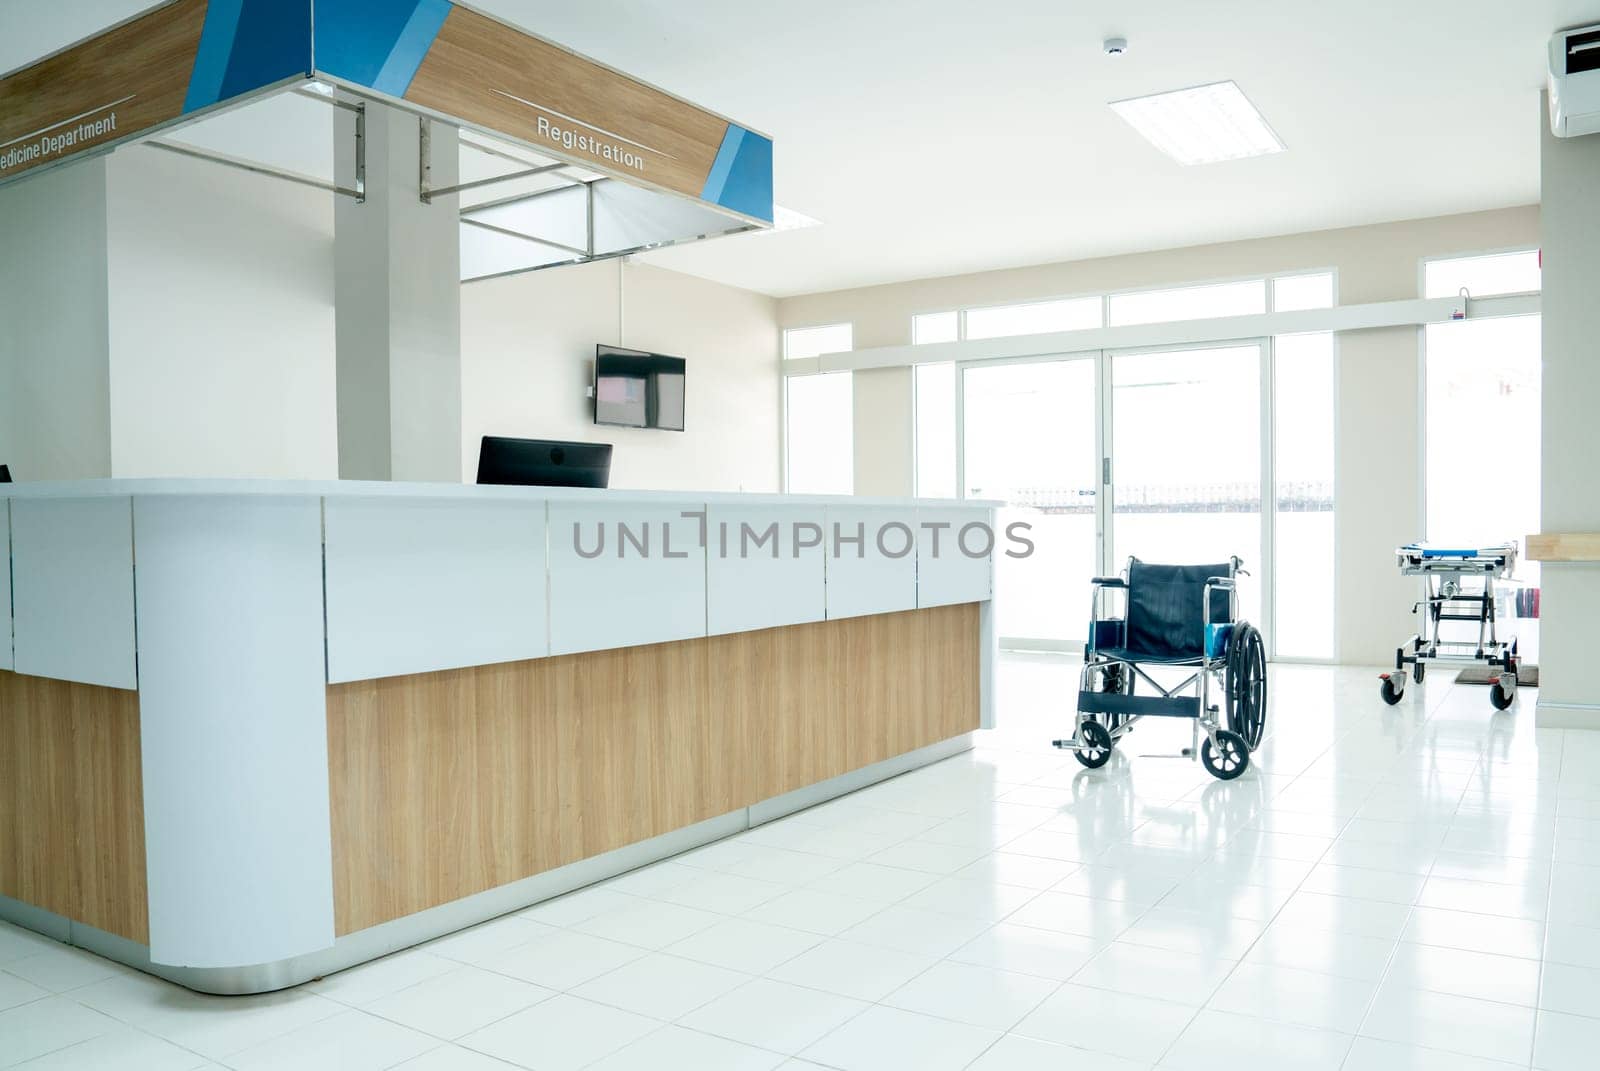 Empty room in area of reception or registration counter in hospital with wheelchair or mobilebed to support healthcare and treatment for patient. by nrradmin